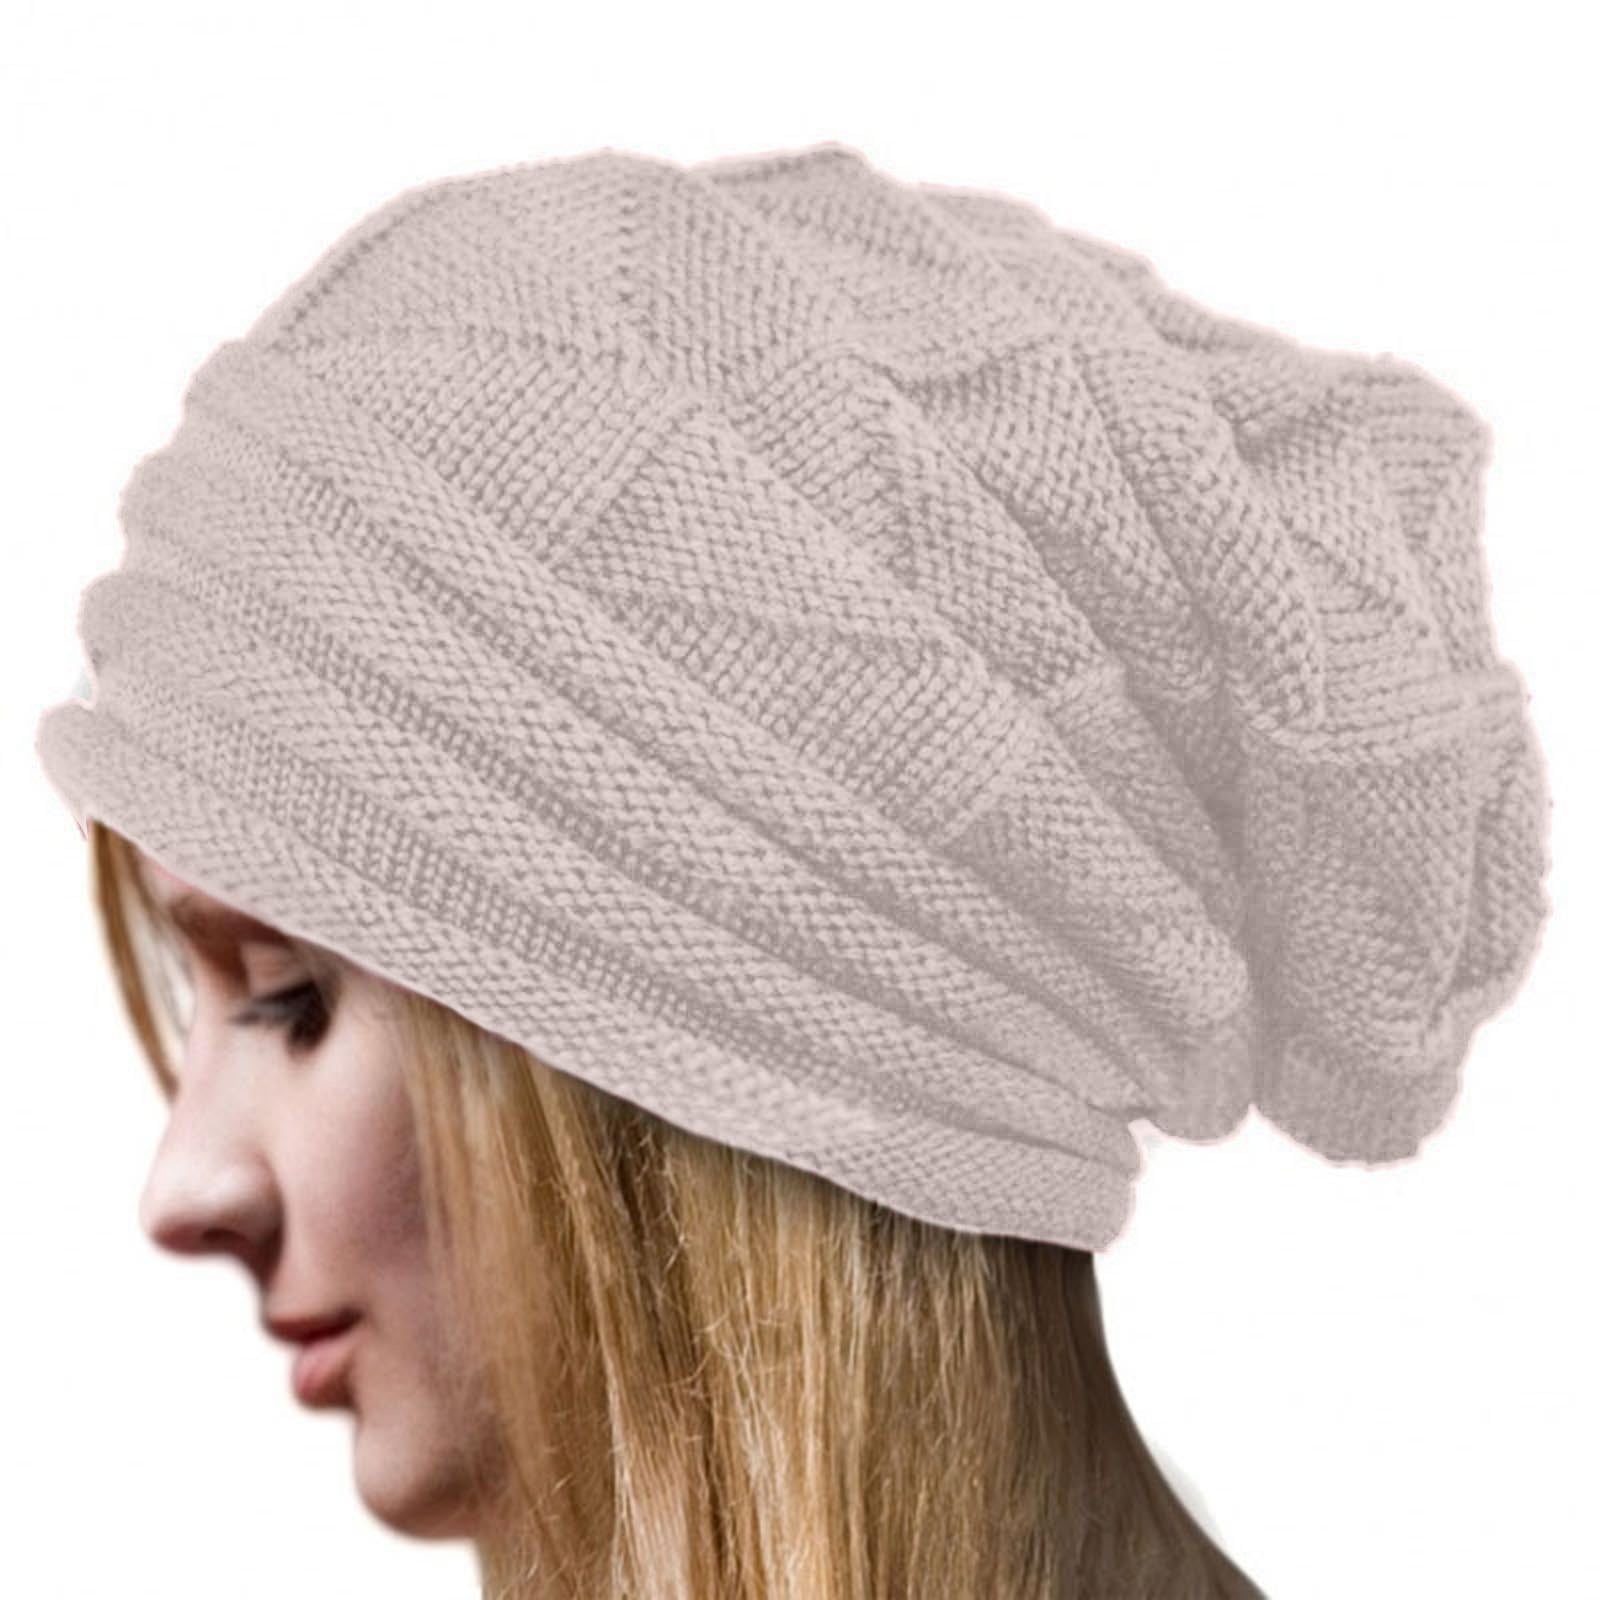 RPVATI Women Winter Chunky Hat Soft Warm Slouchy Cable Knit Beanie